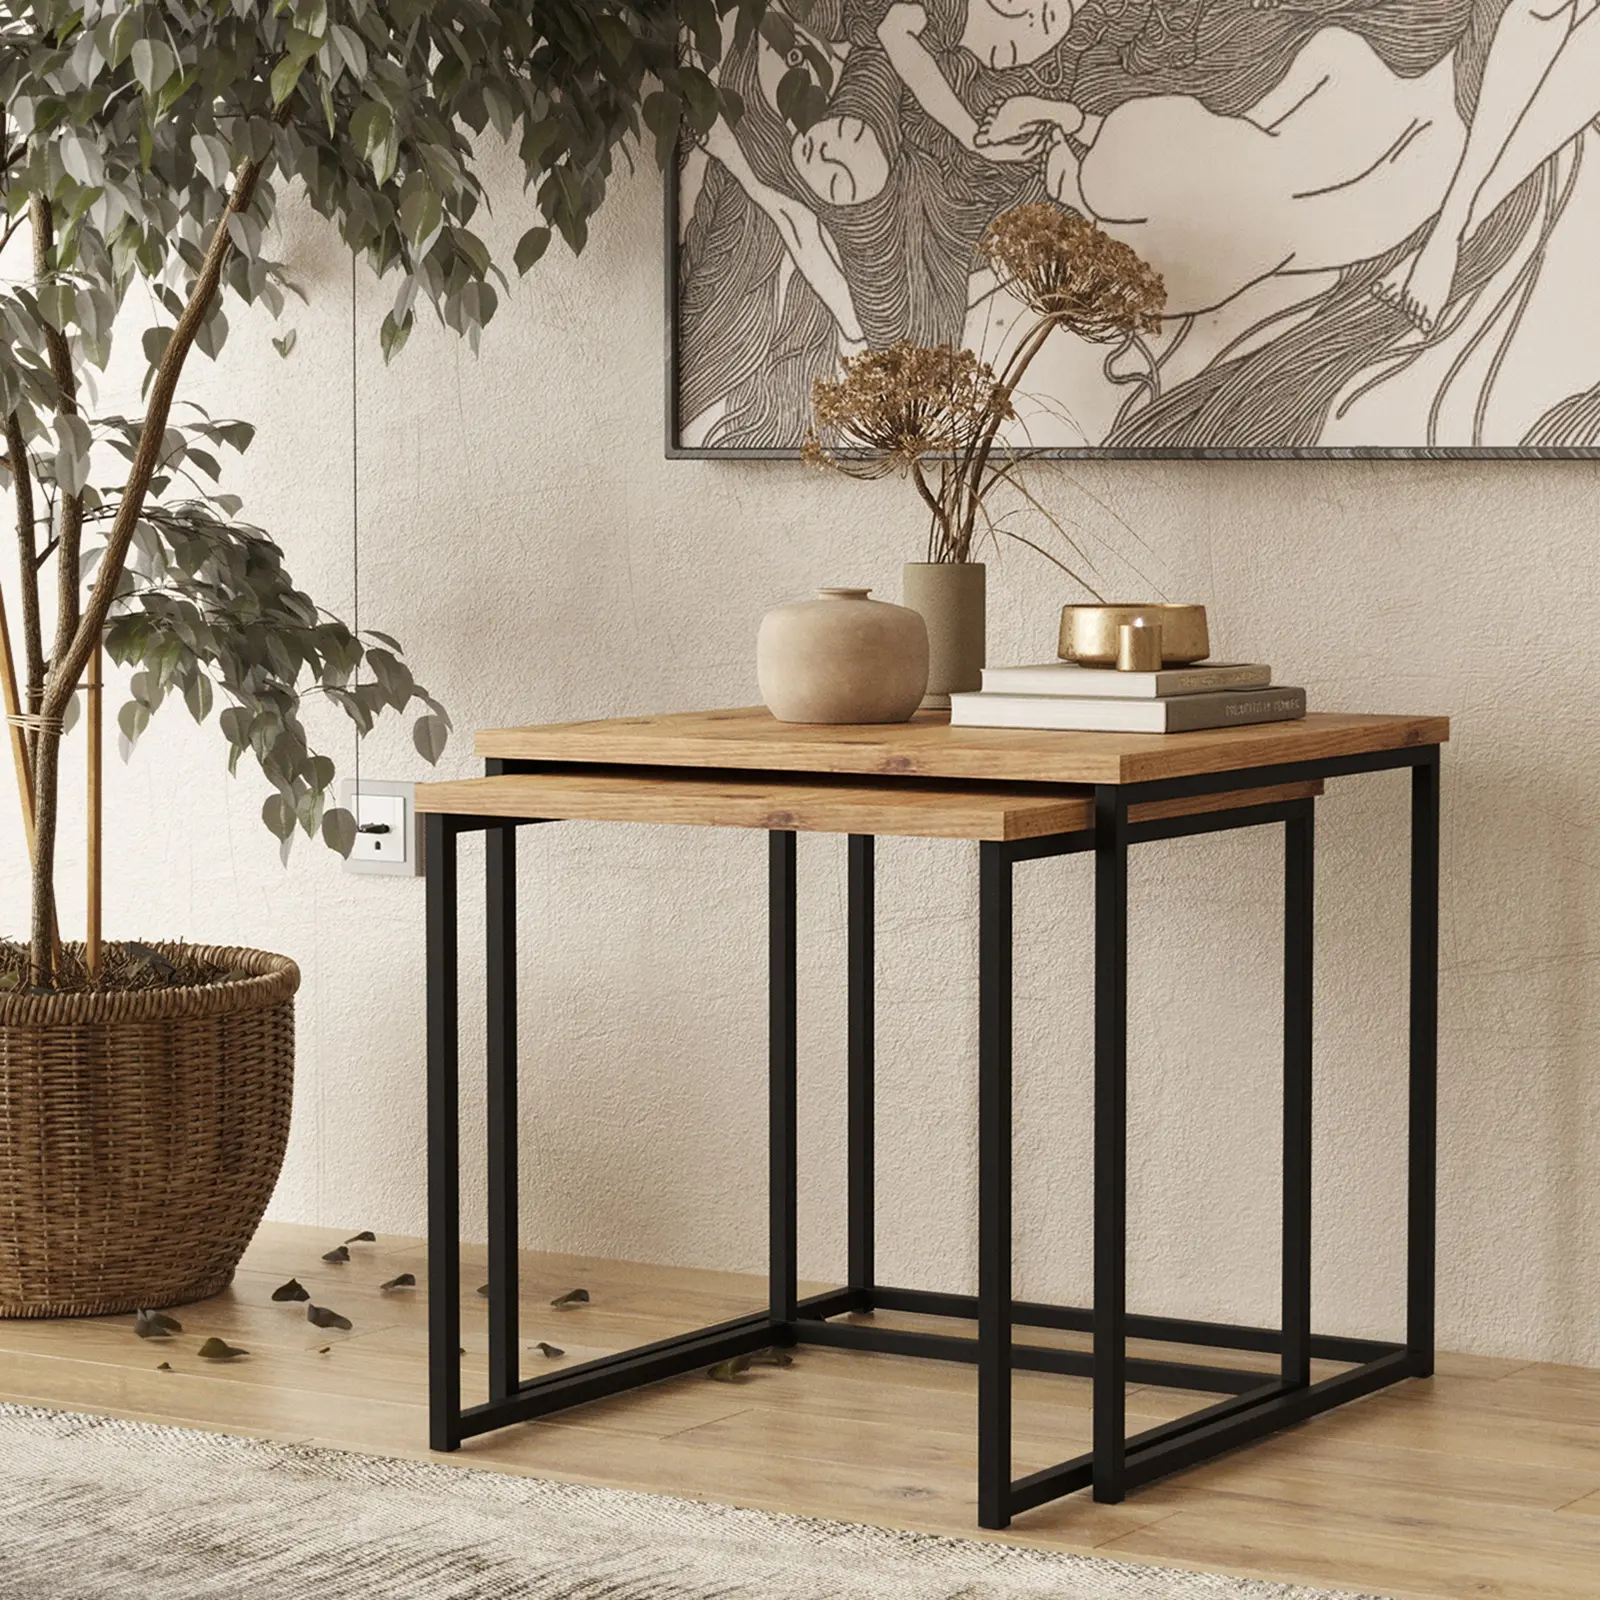 YURUDESIGN COFFEE TABLE WITH METAL LEG BEST PRICE HIGH QUALITY VG8-A SIDE TABLE FOR LIVING ROOM